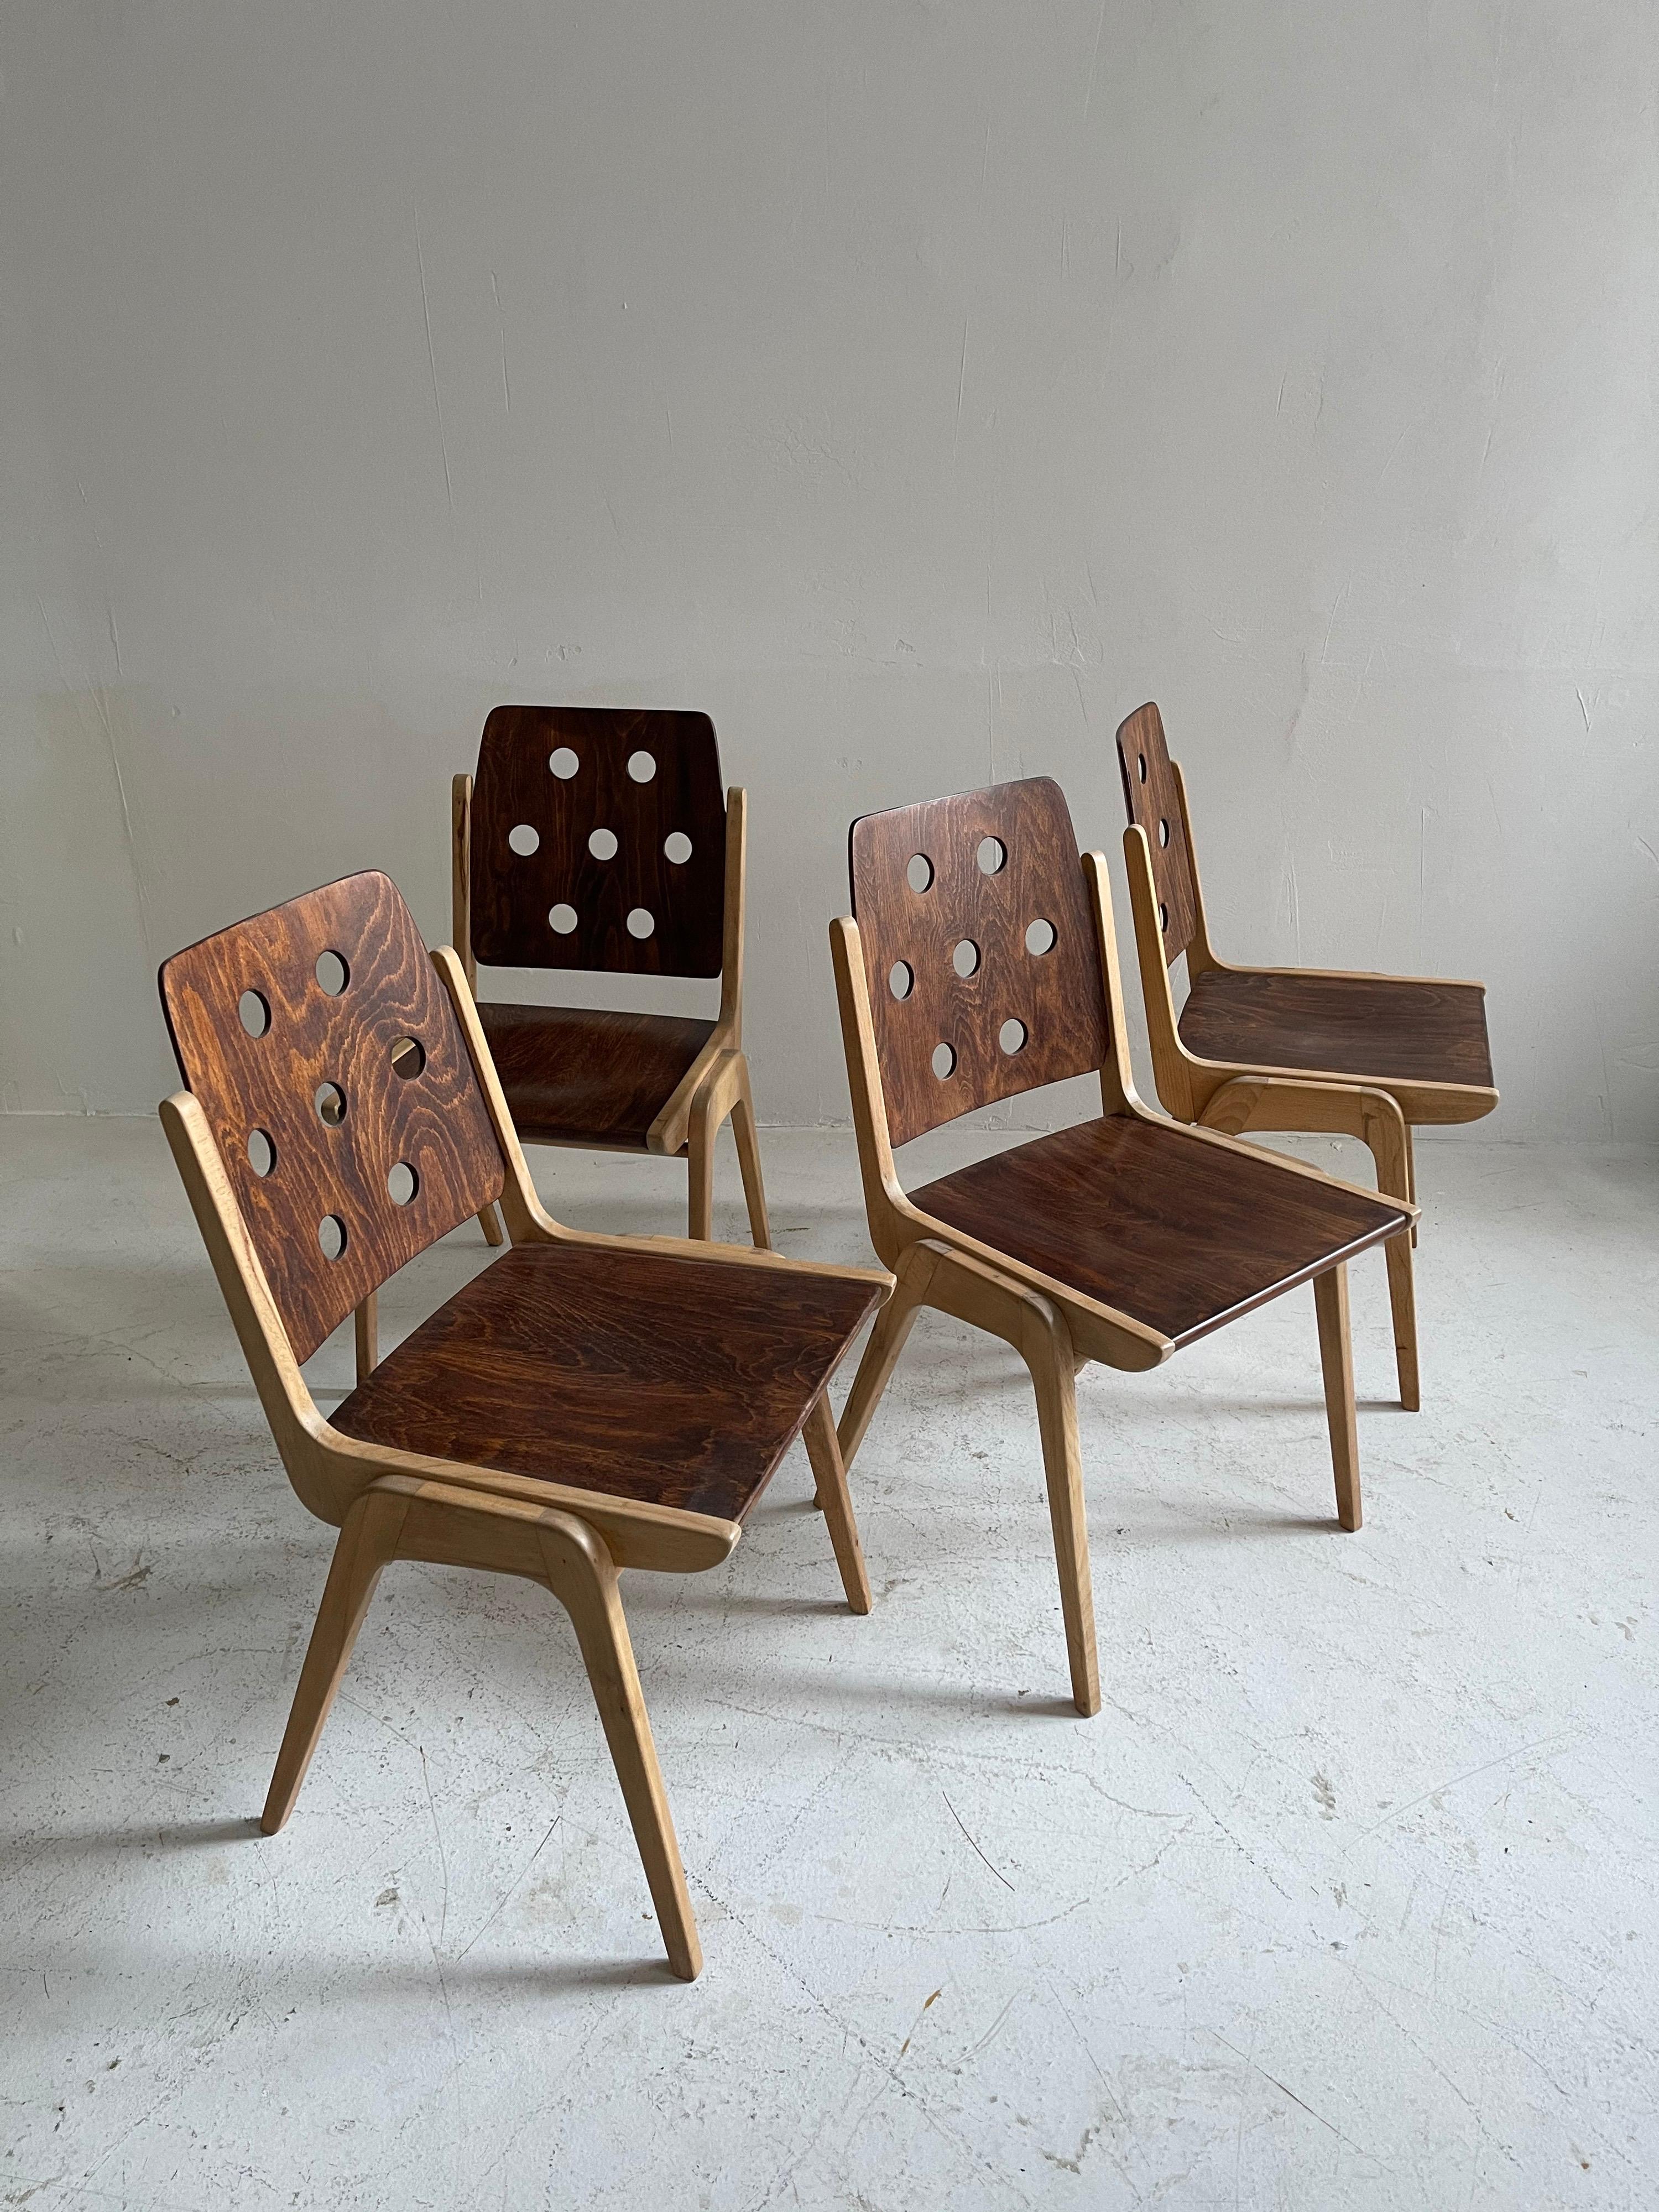 Franz Schuster Model 'Maestro' Dining Room Chairs & Stools, Austria, 1950s In Good Condition For Sale In Vienna, AT